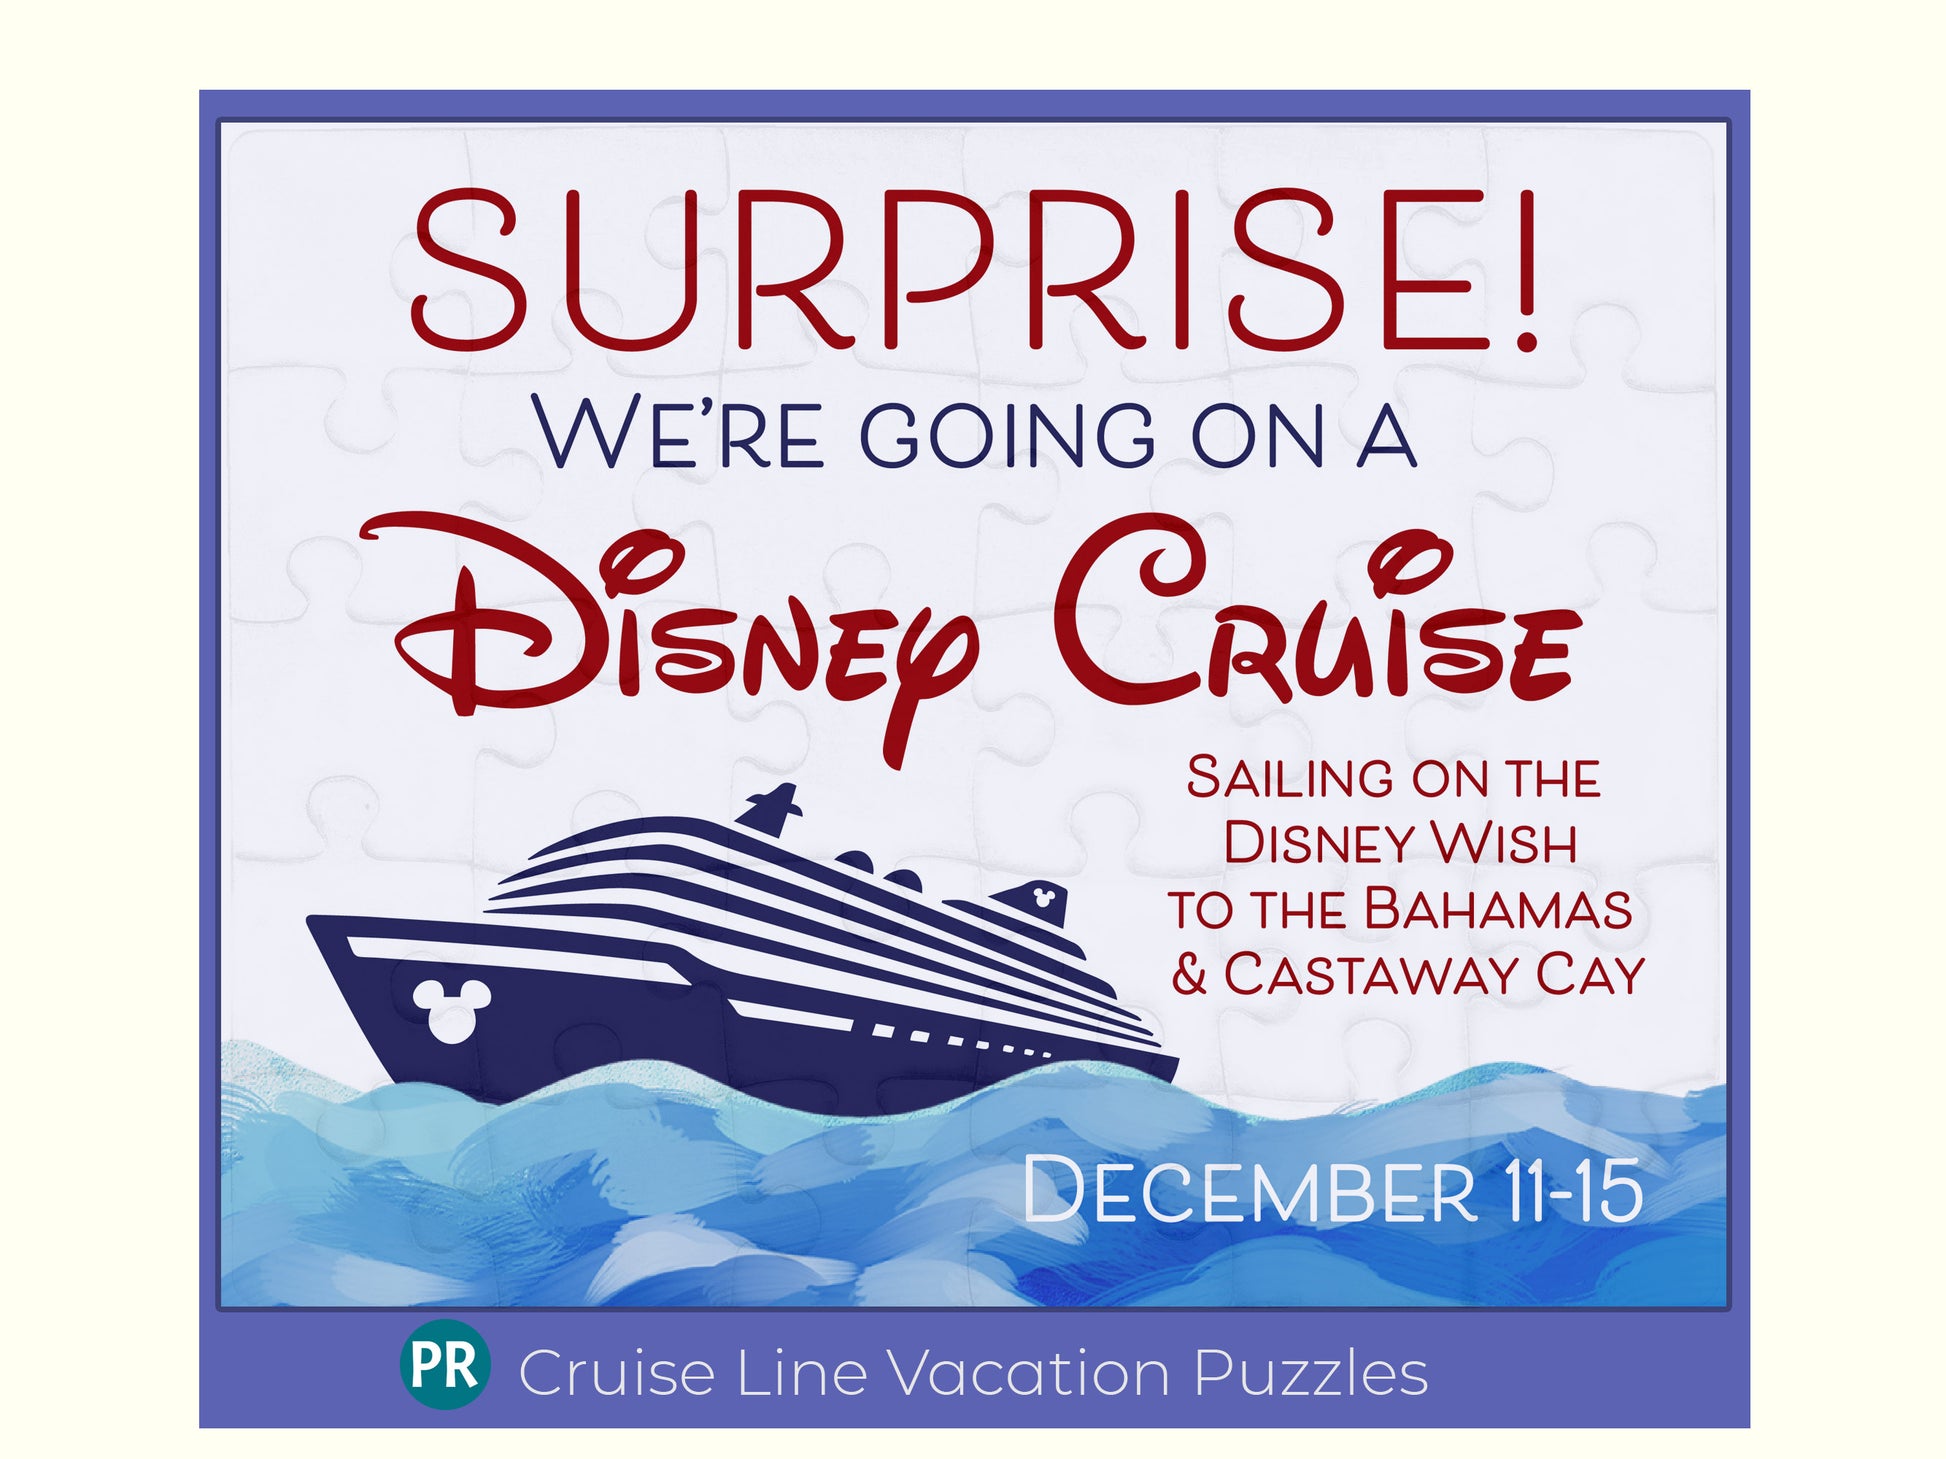 Disney Cruise jigsaw puzzle reveal. The puzzle is used as a gift for someone to announce they are going on a Disney Cruise. The puzzle has an ocean theme with a cruise ship on it and the message is about the trip.